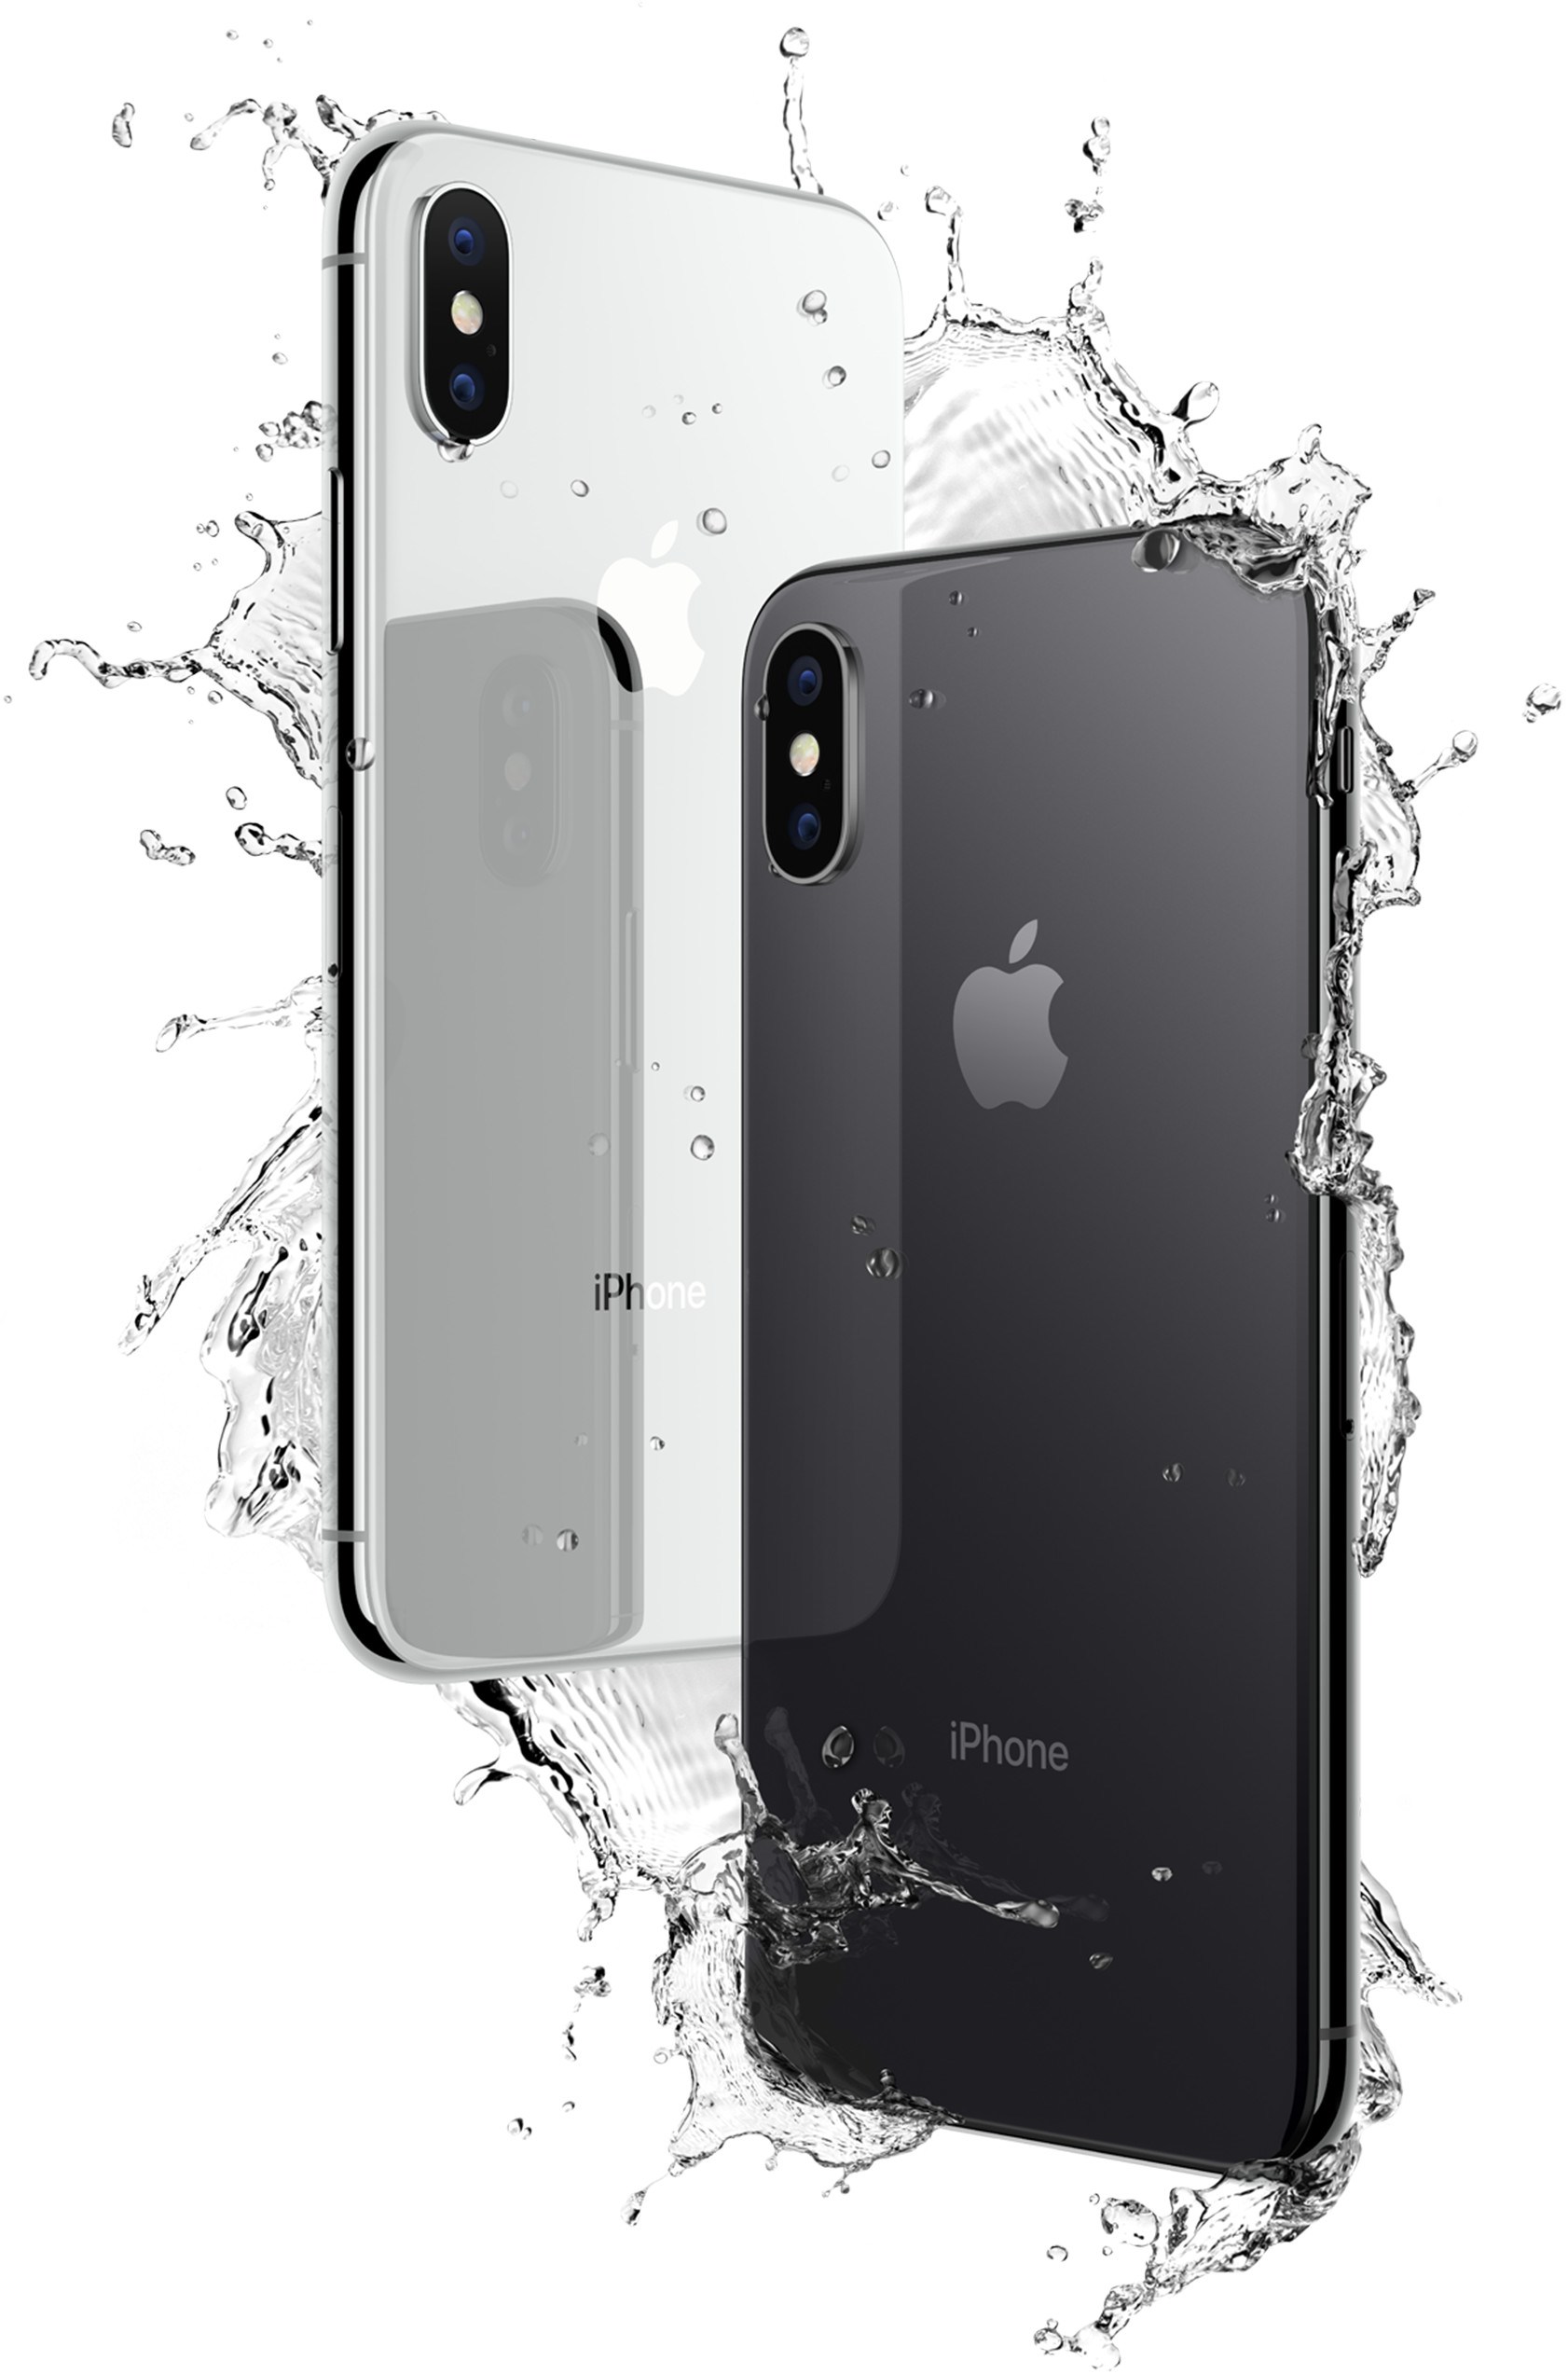 iPhone X - Price, Colors, Specs & Reviews - AT&T